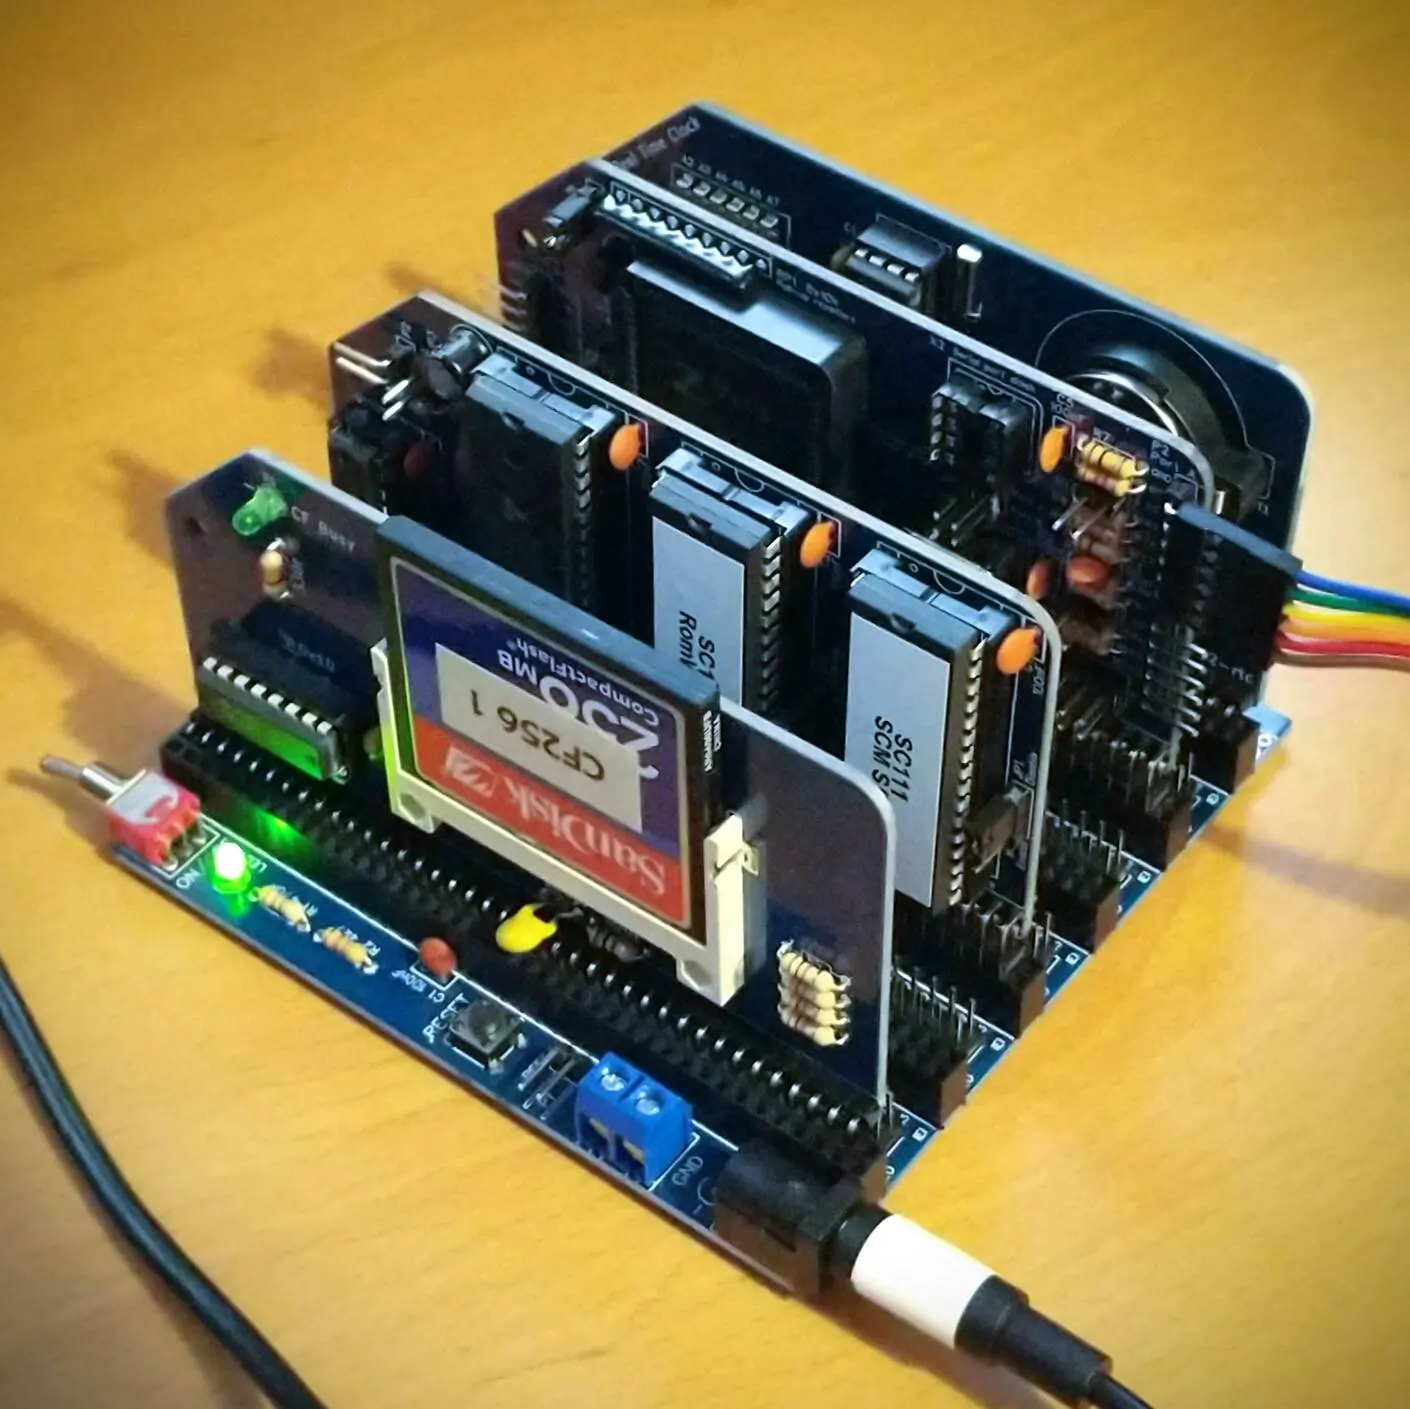 A small electronic device made up of a base board with multiple smaller
cards plugged into it, each with a few chips on. The whole thing fits into a 10
by 10 by 7 cm cuboid.